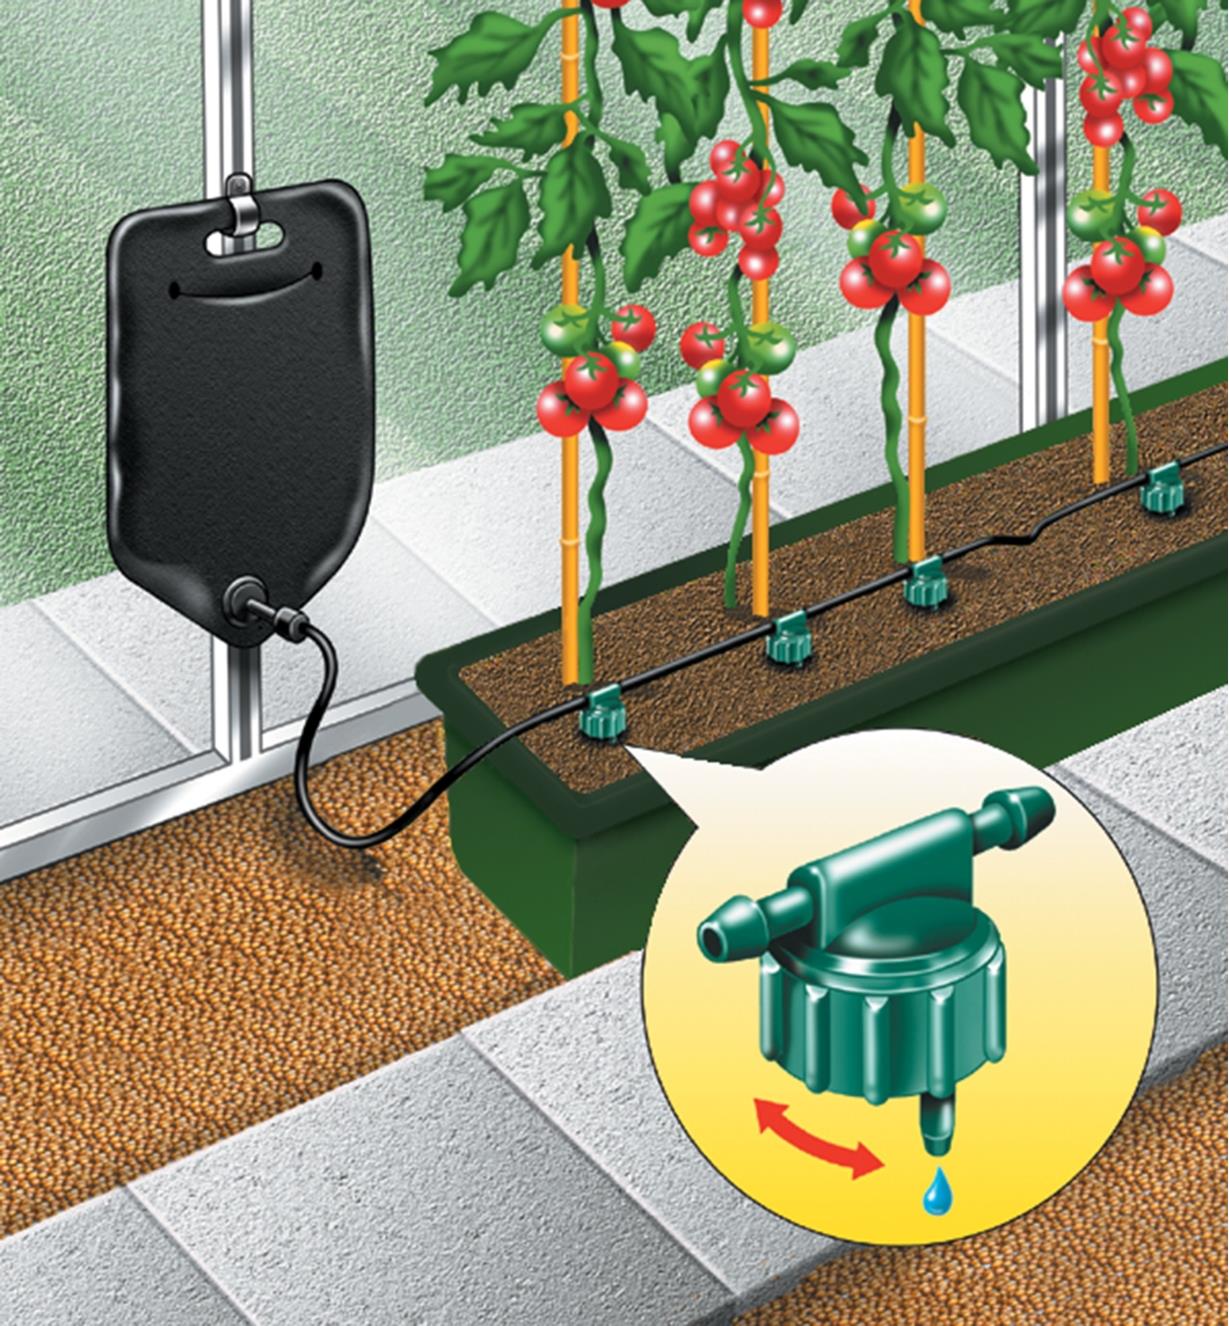 Illustrating a setup of the drip irrigation kit and an inset of an adjustable dripper